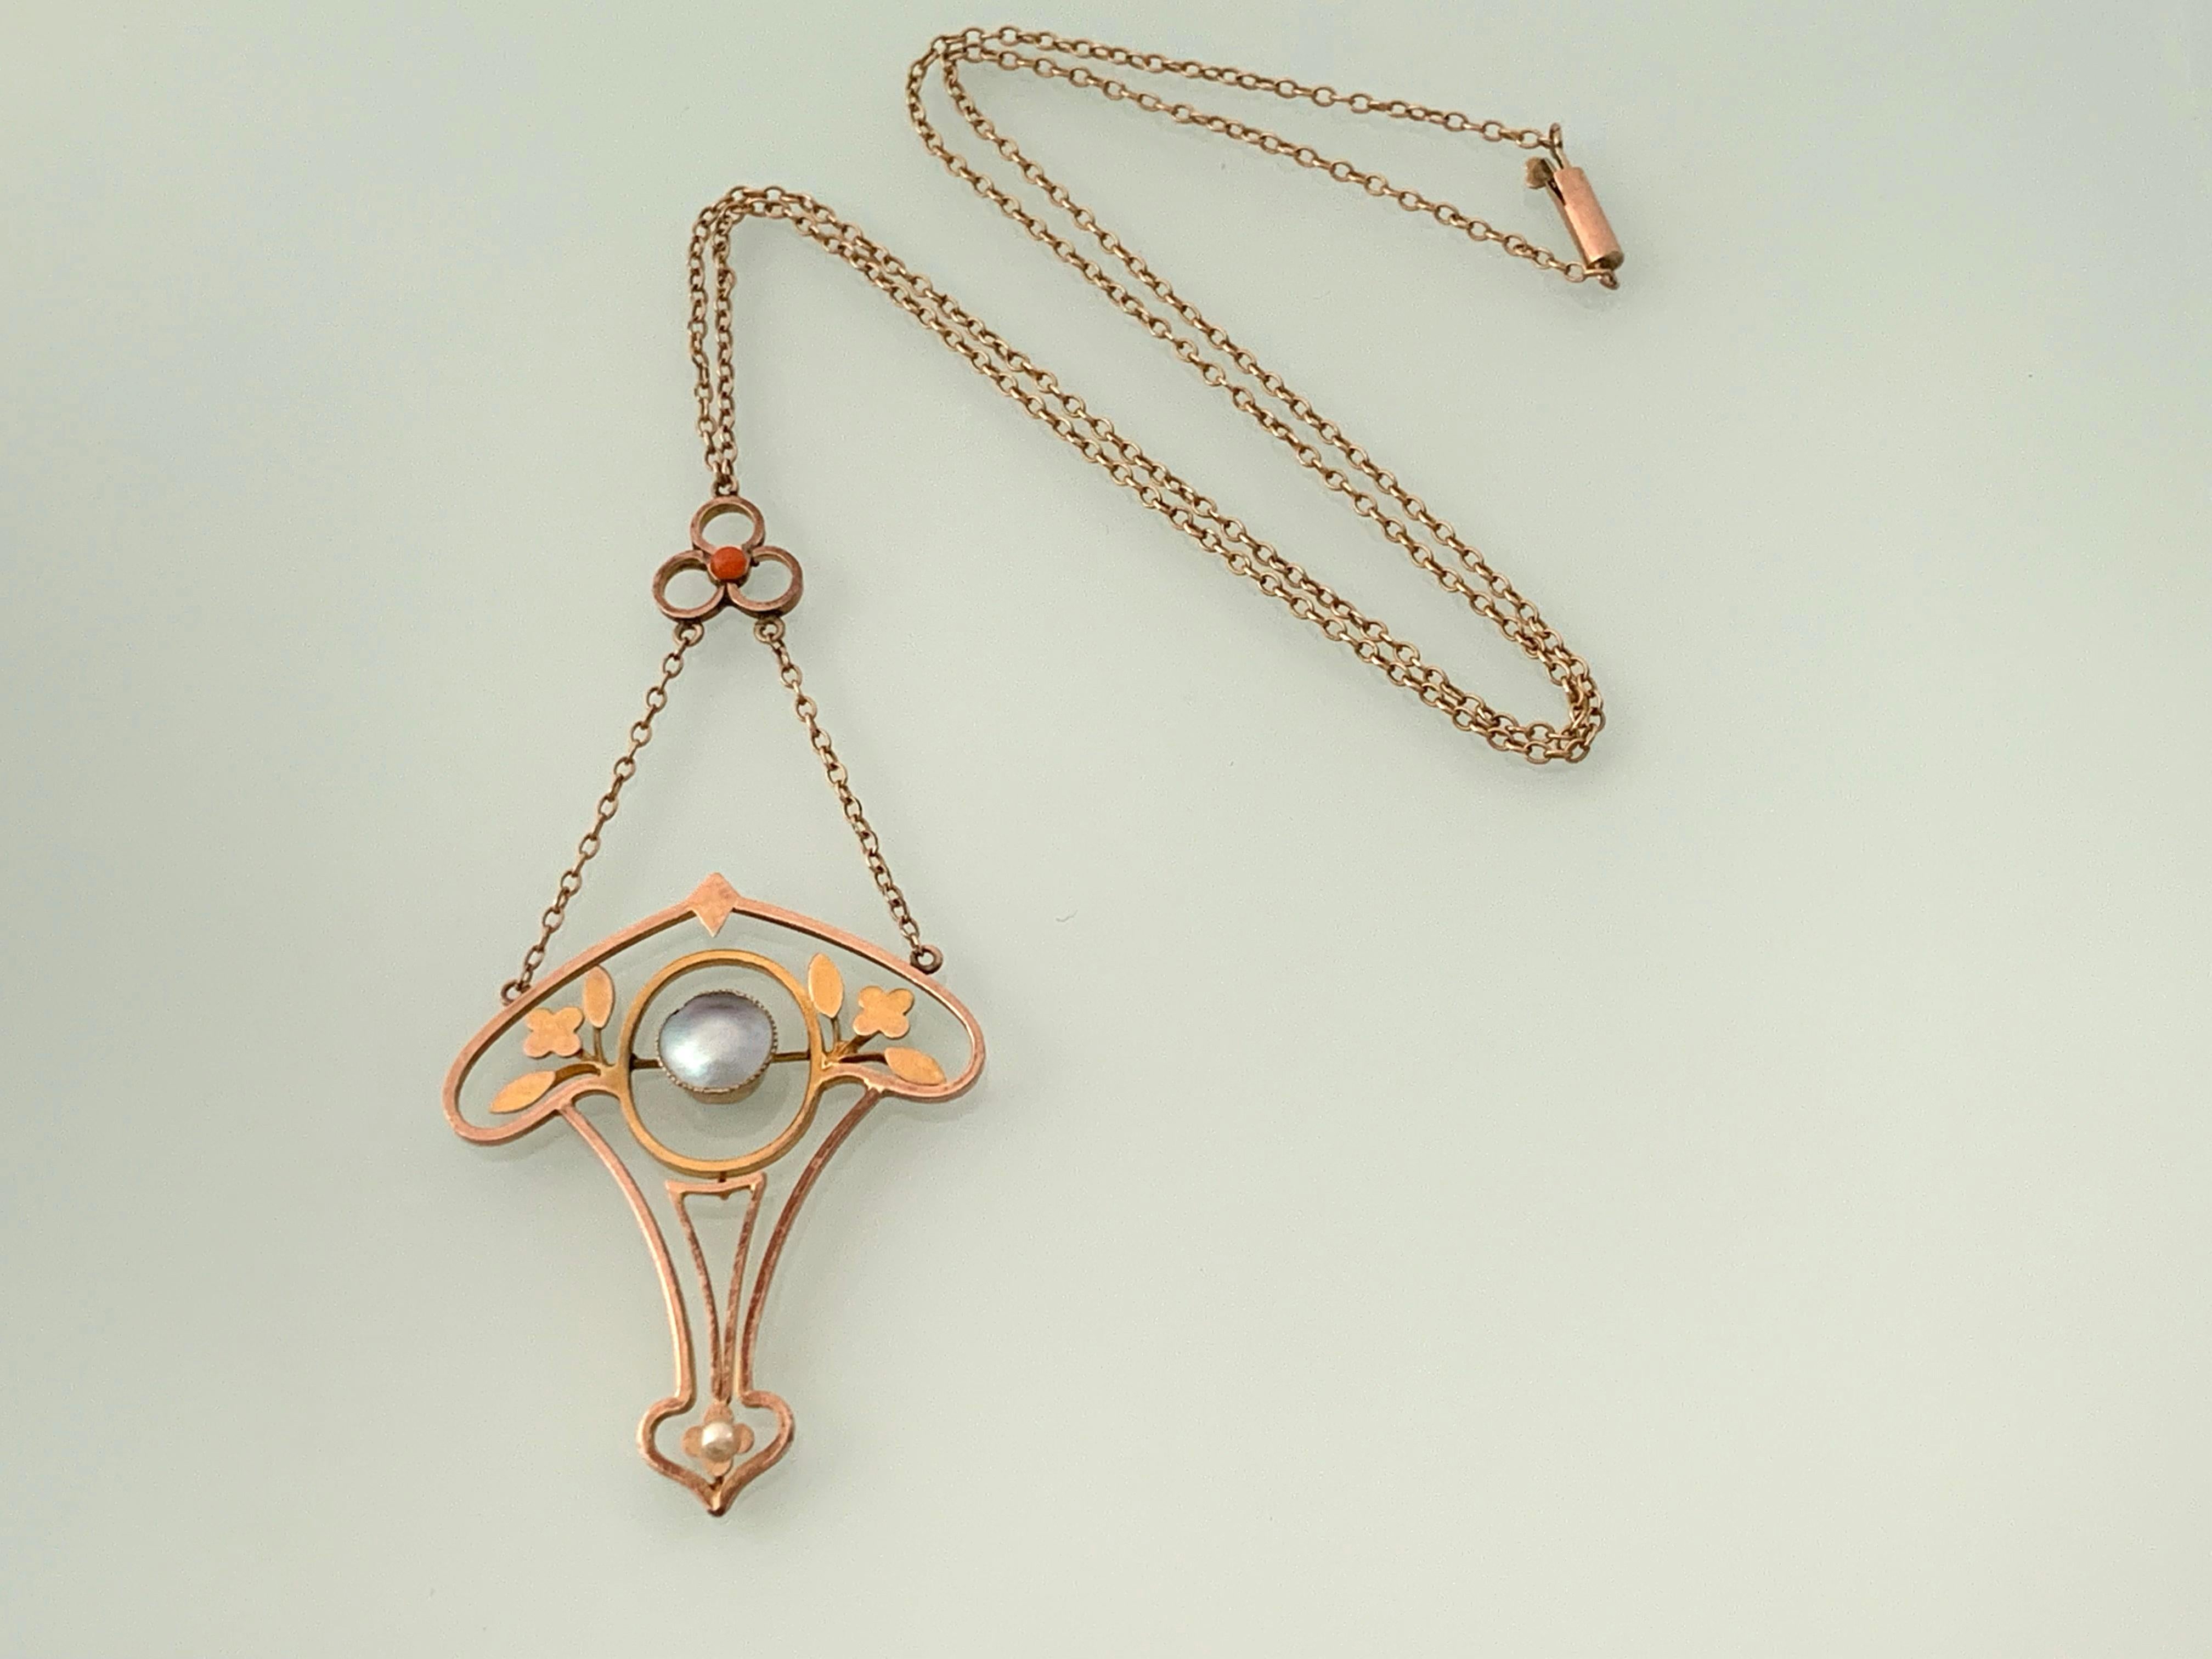 9ct Rose Gold Victorian Antique Necklace
with central Half Pearl  topped with a small coral cabochon & finalled with a seed pearl
The central Pearl has a blue Hue
fastened with a Barrel clasp .
The chain is approx 1mm thickness
and without the drop